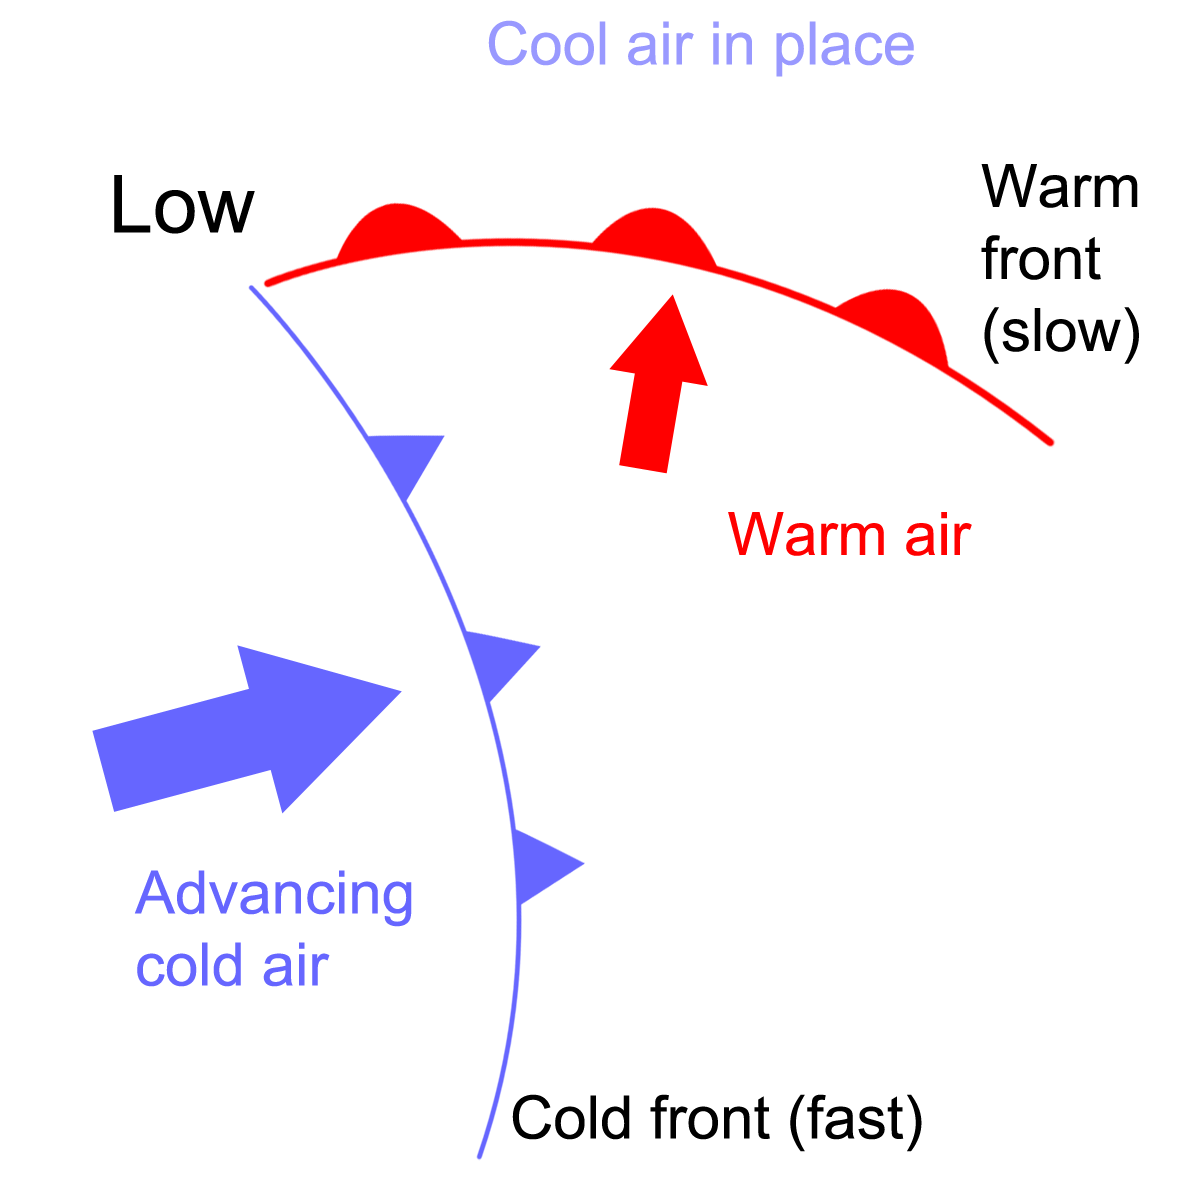 Diagram showing a slow moving warn front and a faster cold front behind it